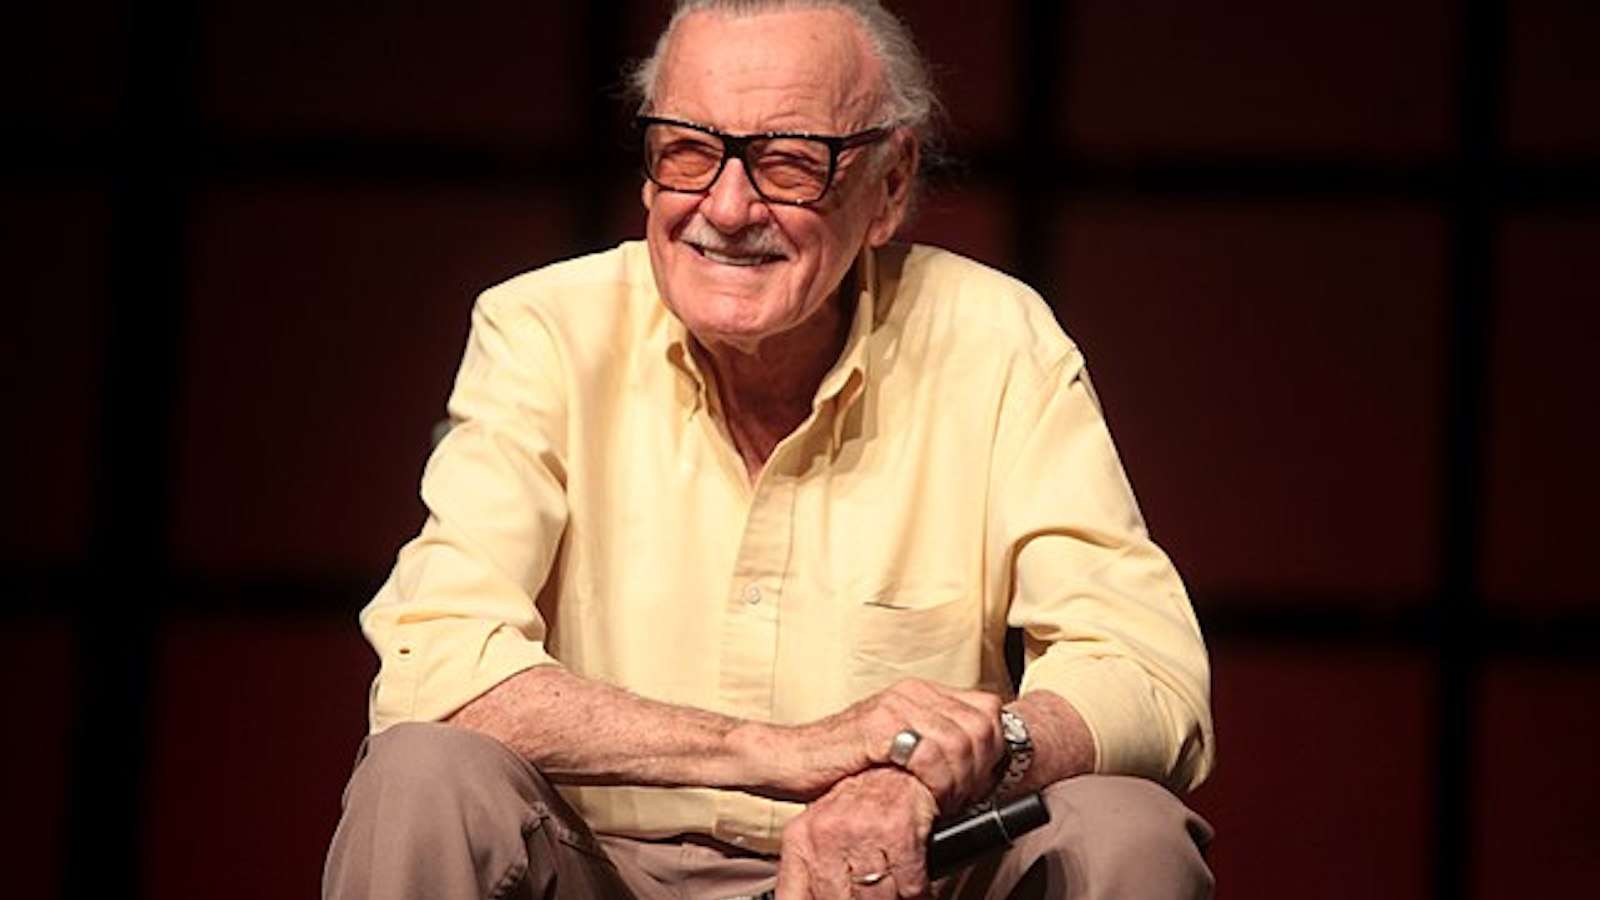 Stan Lee speaking at the 2014 Phoenix Comicon at the Phoenix Convention Center in Phoenix, Arizona.